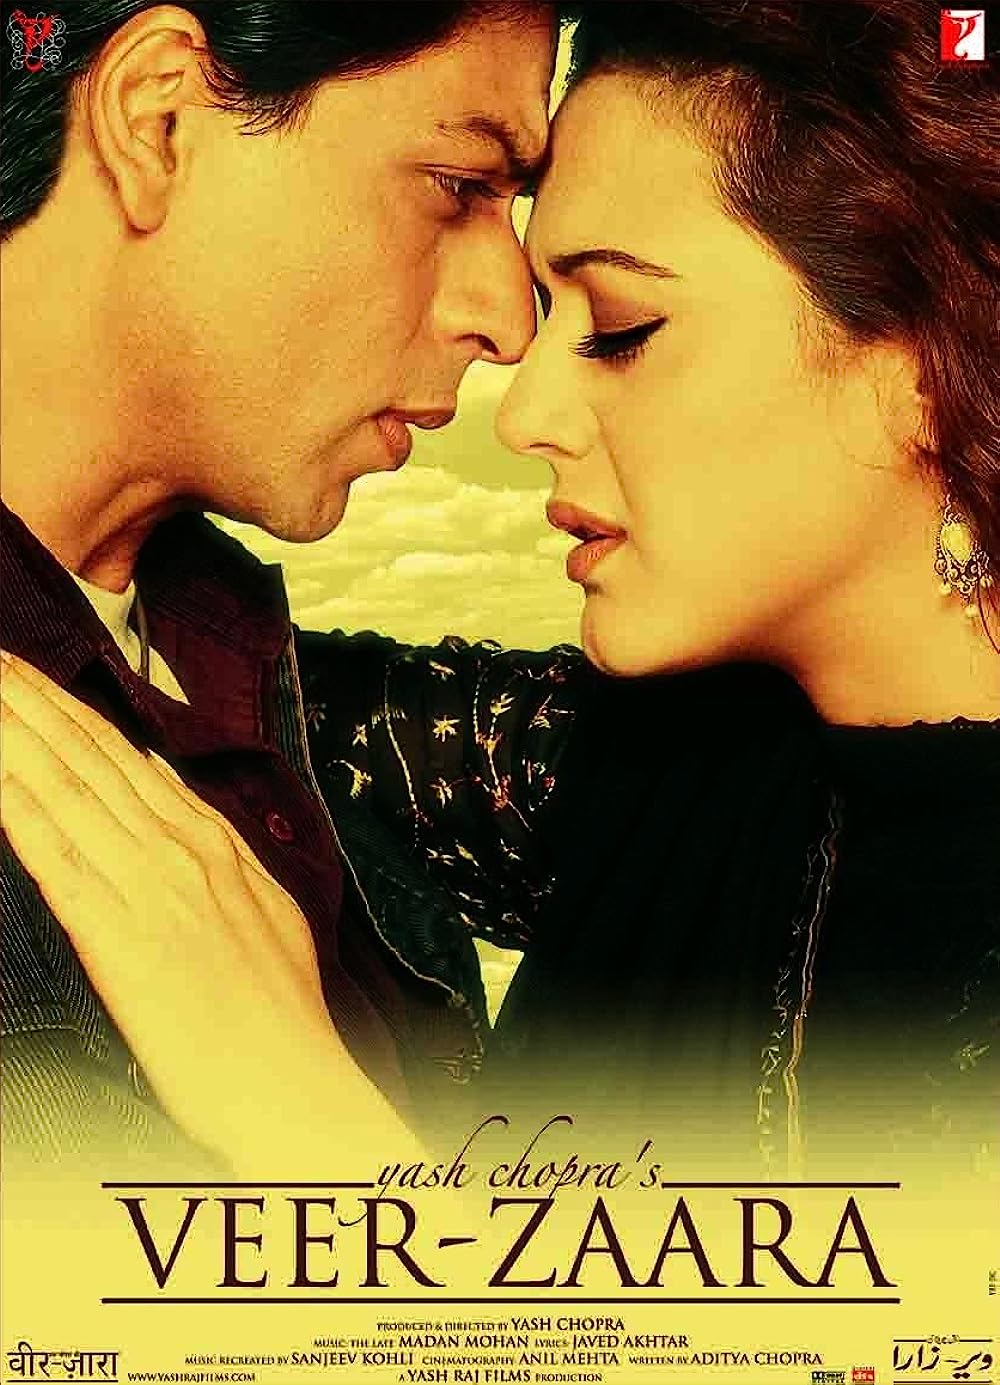 Veer-Zaara (2004) is a timeless and emotionally resonant love saga that transcends borders and religions. The film revolves around Veer Pratap Singh (played by Shah Rukh Khan), a devoted Indian Air Force officer, and Zaara Hayaat Khan (portrayed by Preity Zinta), an enchanting Pakistani woman. Their paths intertwine when Veer comes to Zaara's rescue during a journey, and an unbreakable bond of love forms between them.